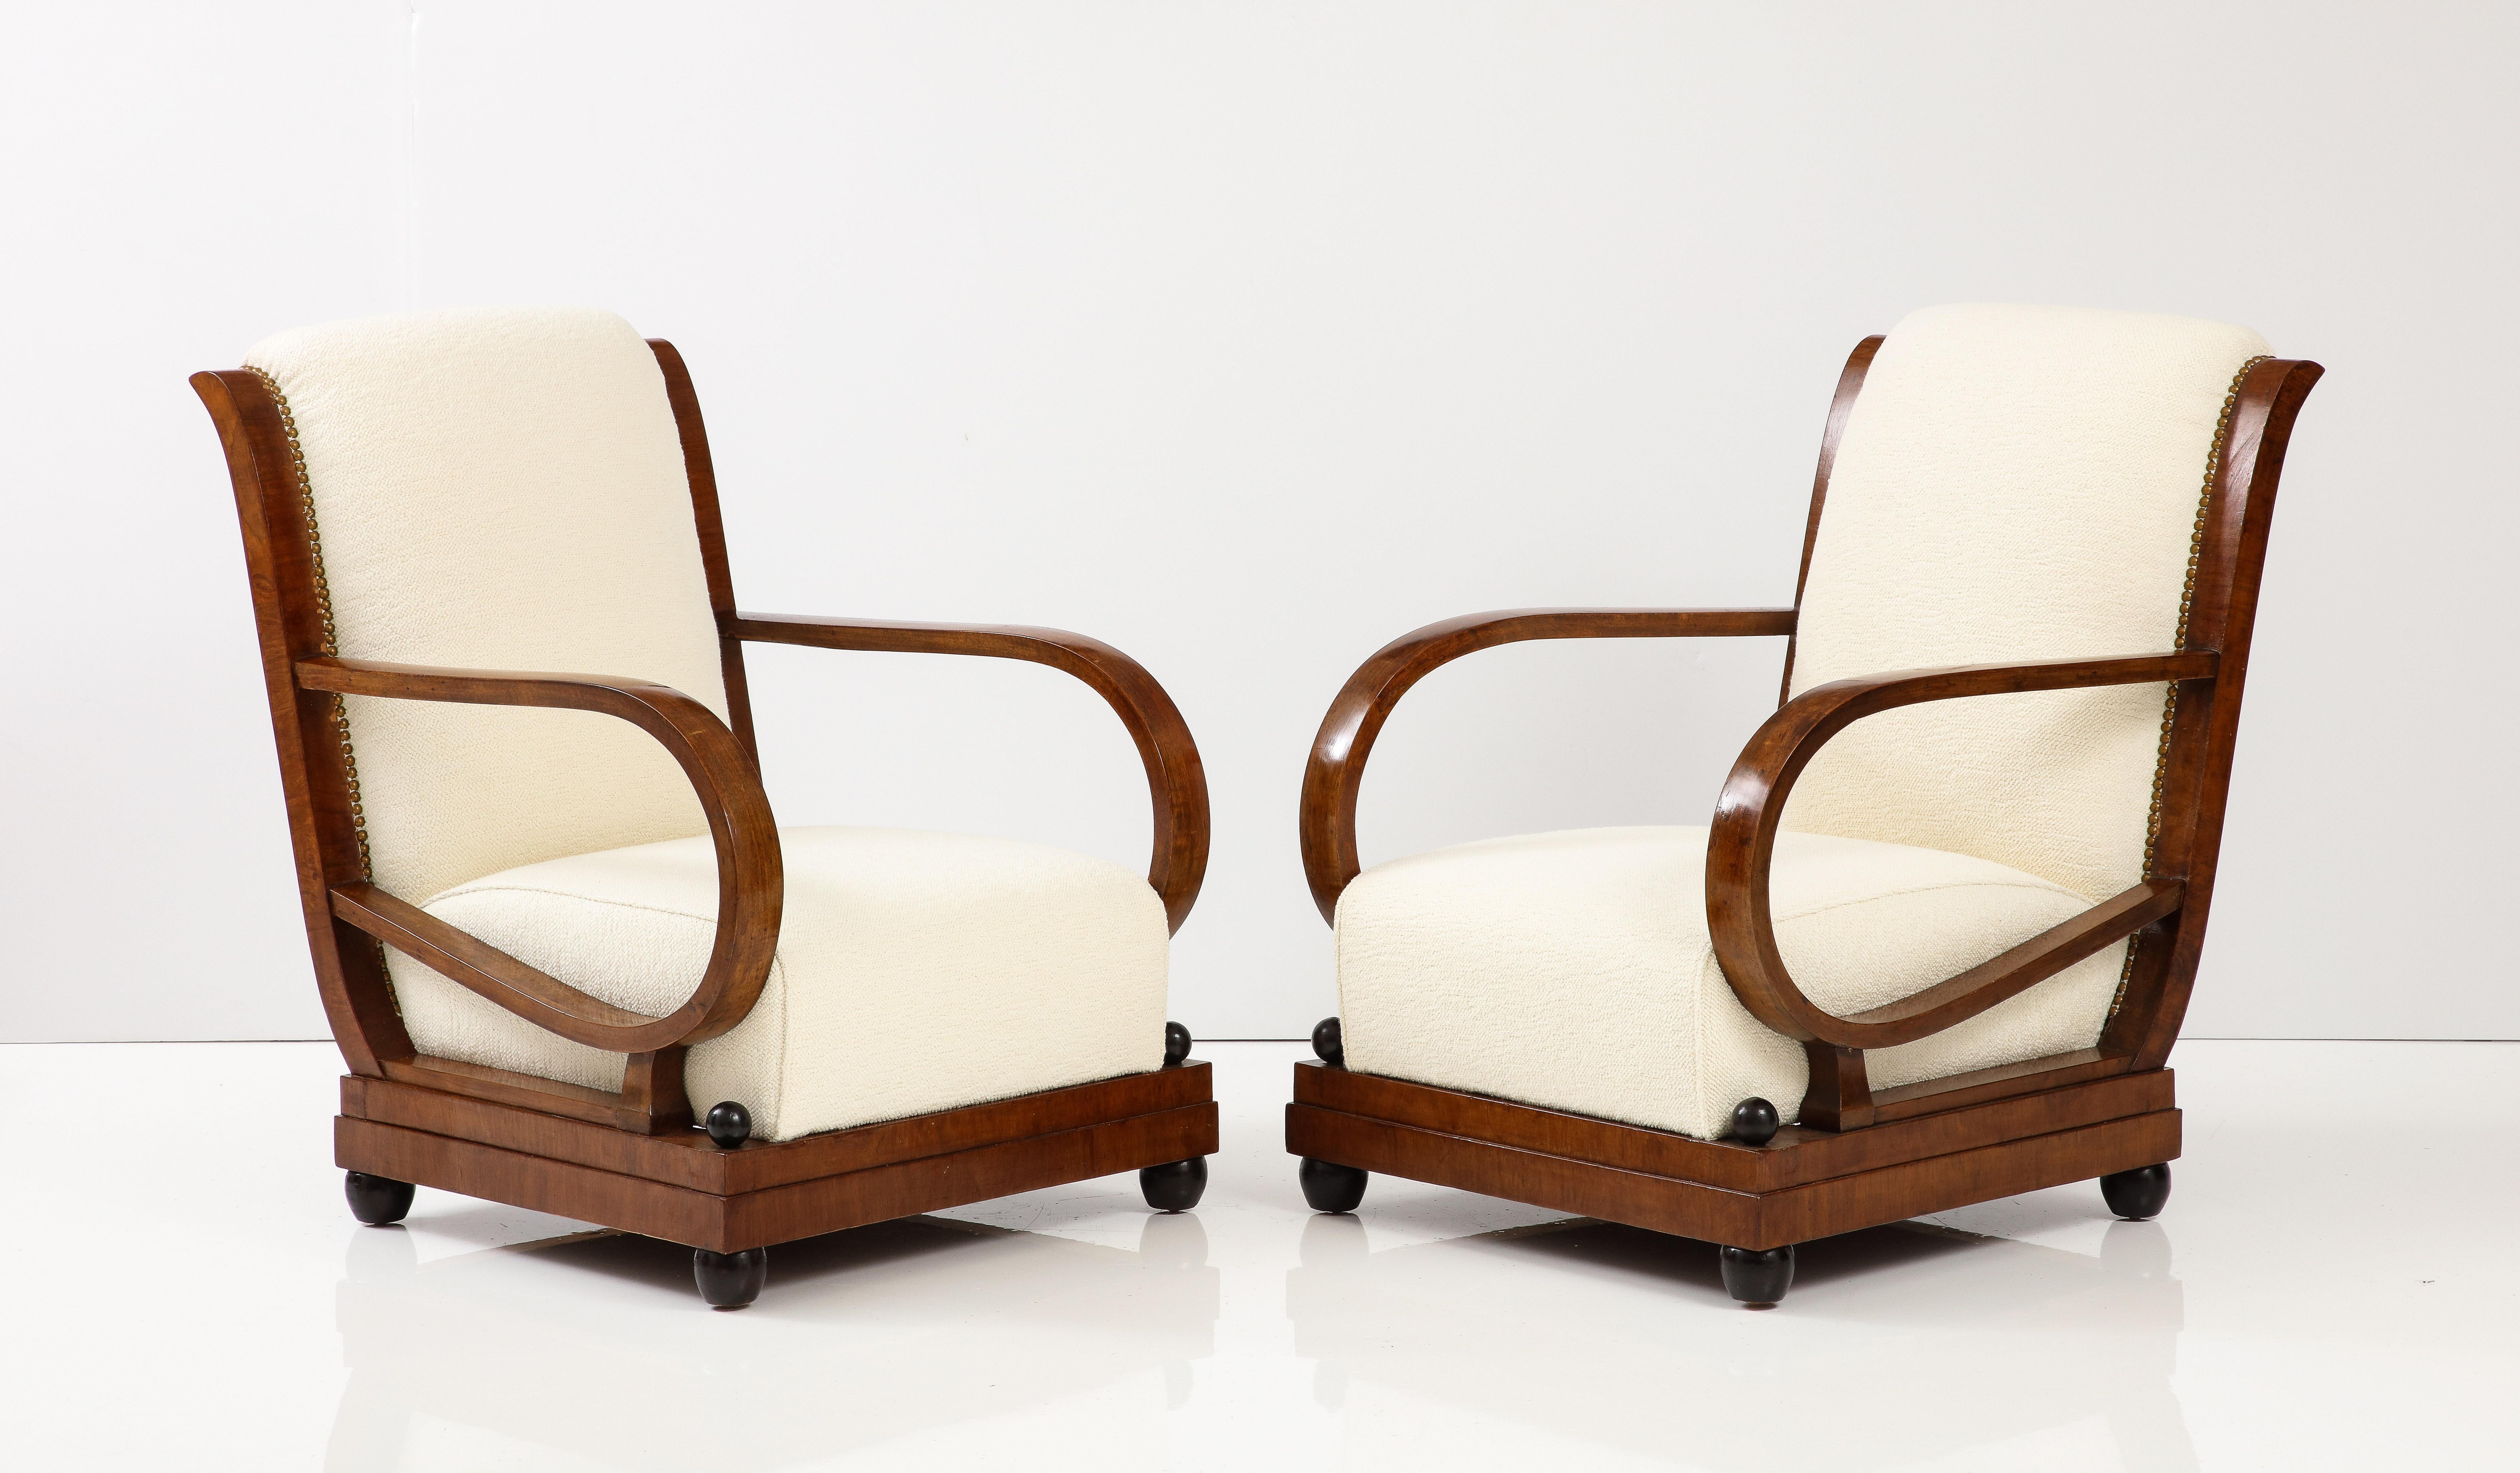 Early 20th Century Italian 1920's Walnut Armchairs / Lounge Chairs with Foot Stools